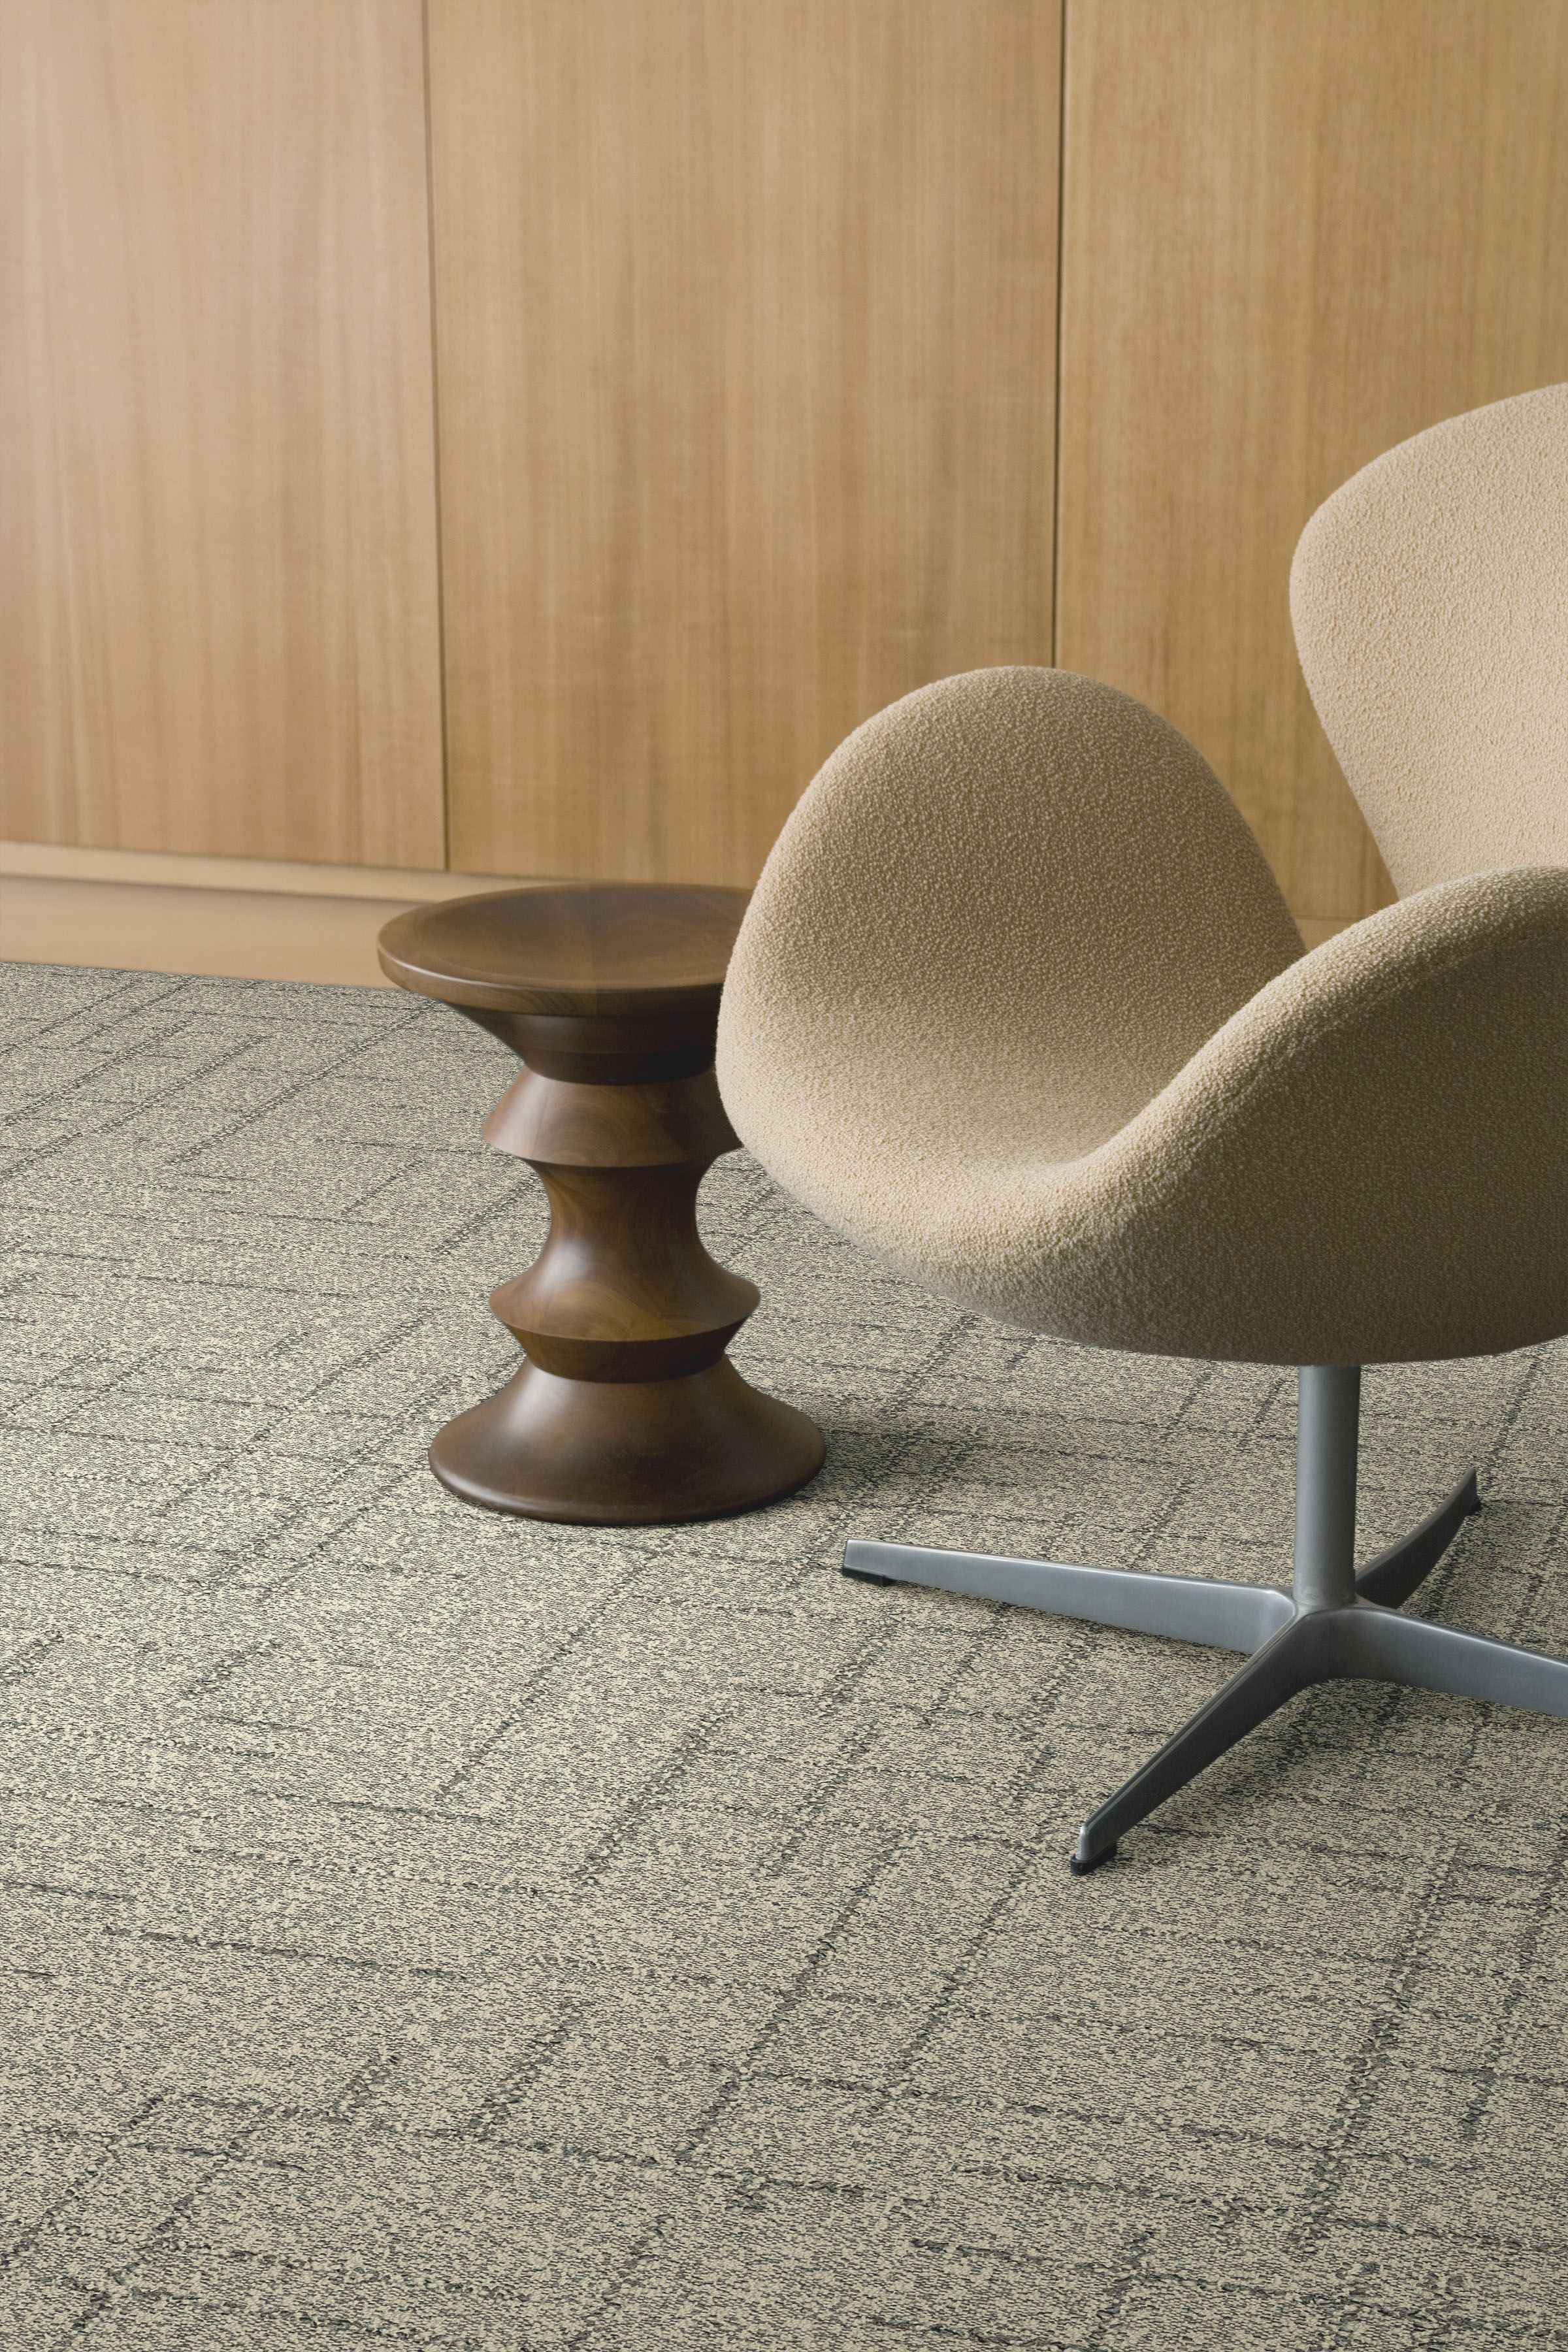 Interface DL925 carpet tile with chair and wood side table imagen número 1